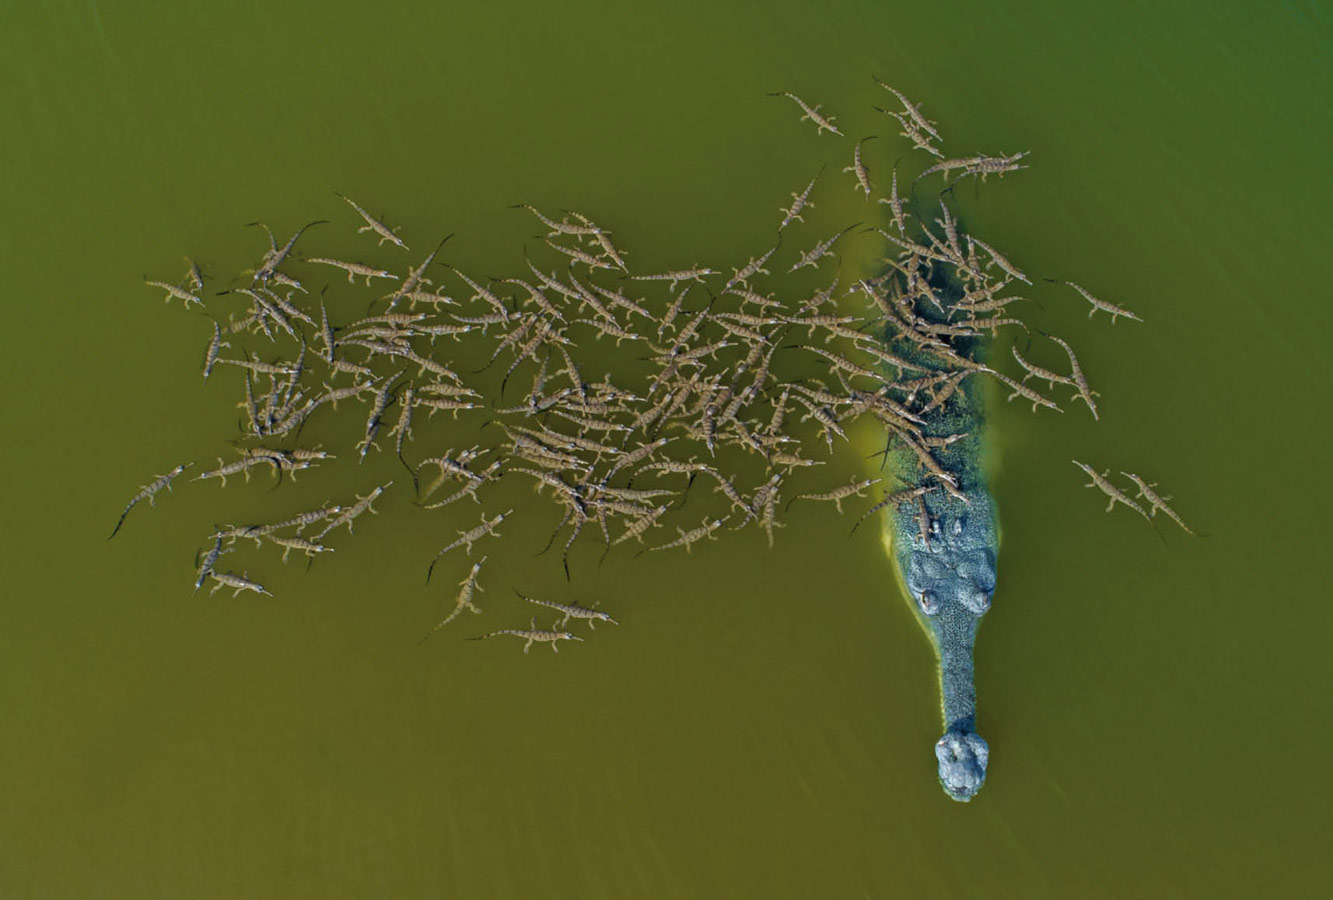 Responsible Dady the Gharial with Babies, © Dhritiman Mukherjee, Runner Up, DrAw Photo Contest - Drone Awards